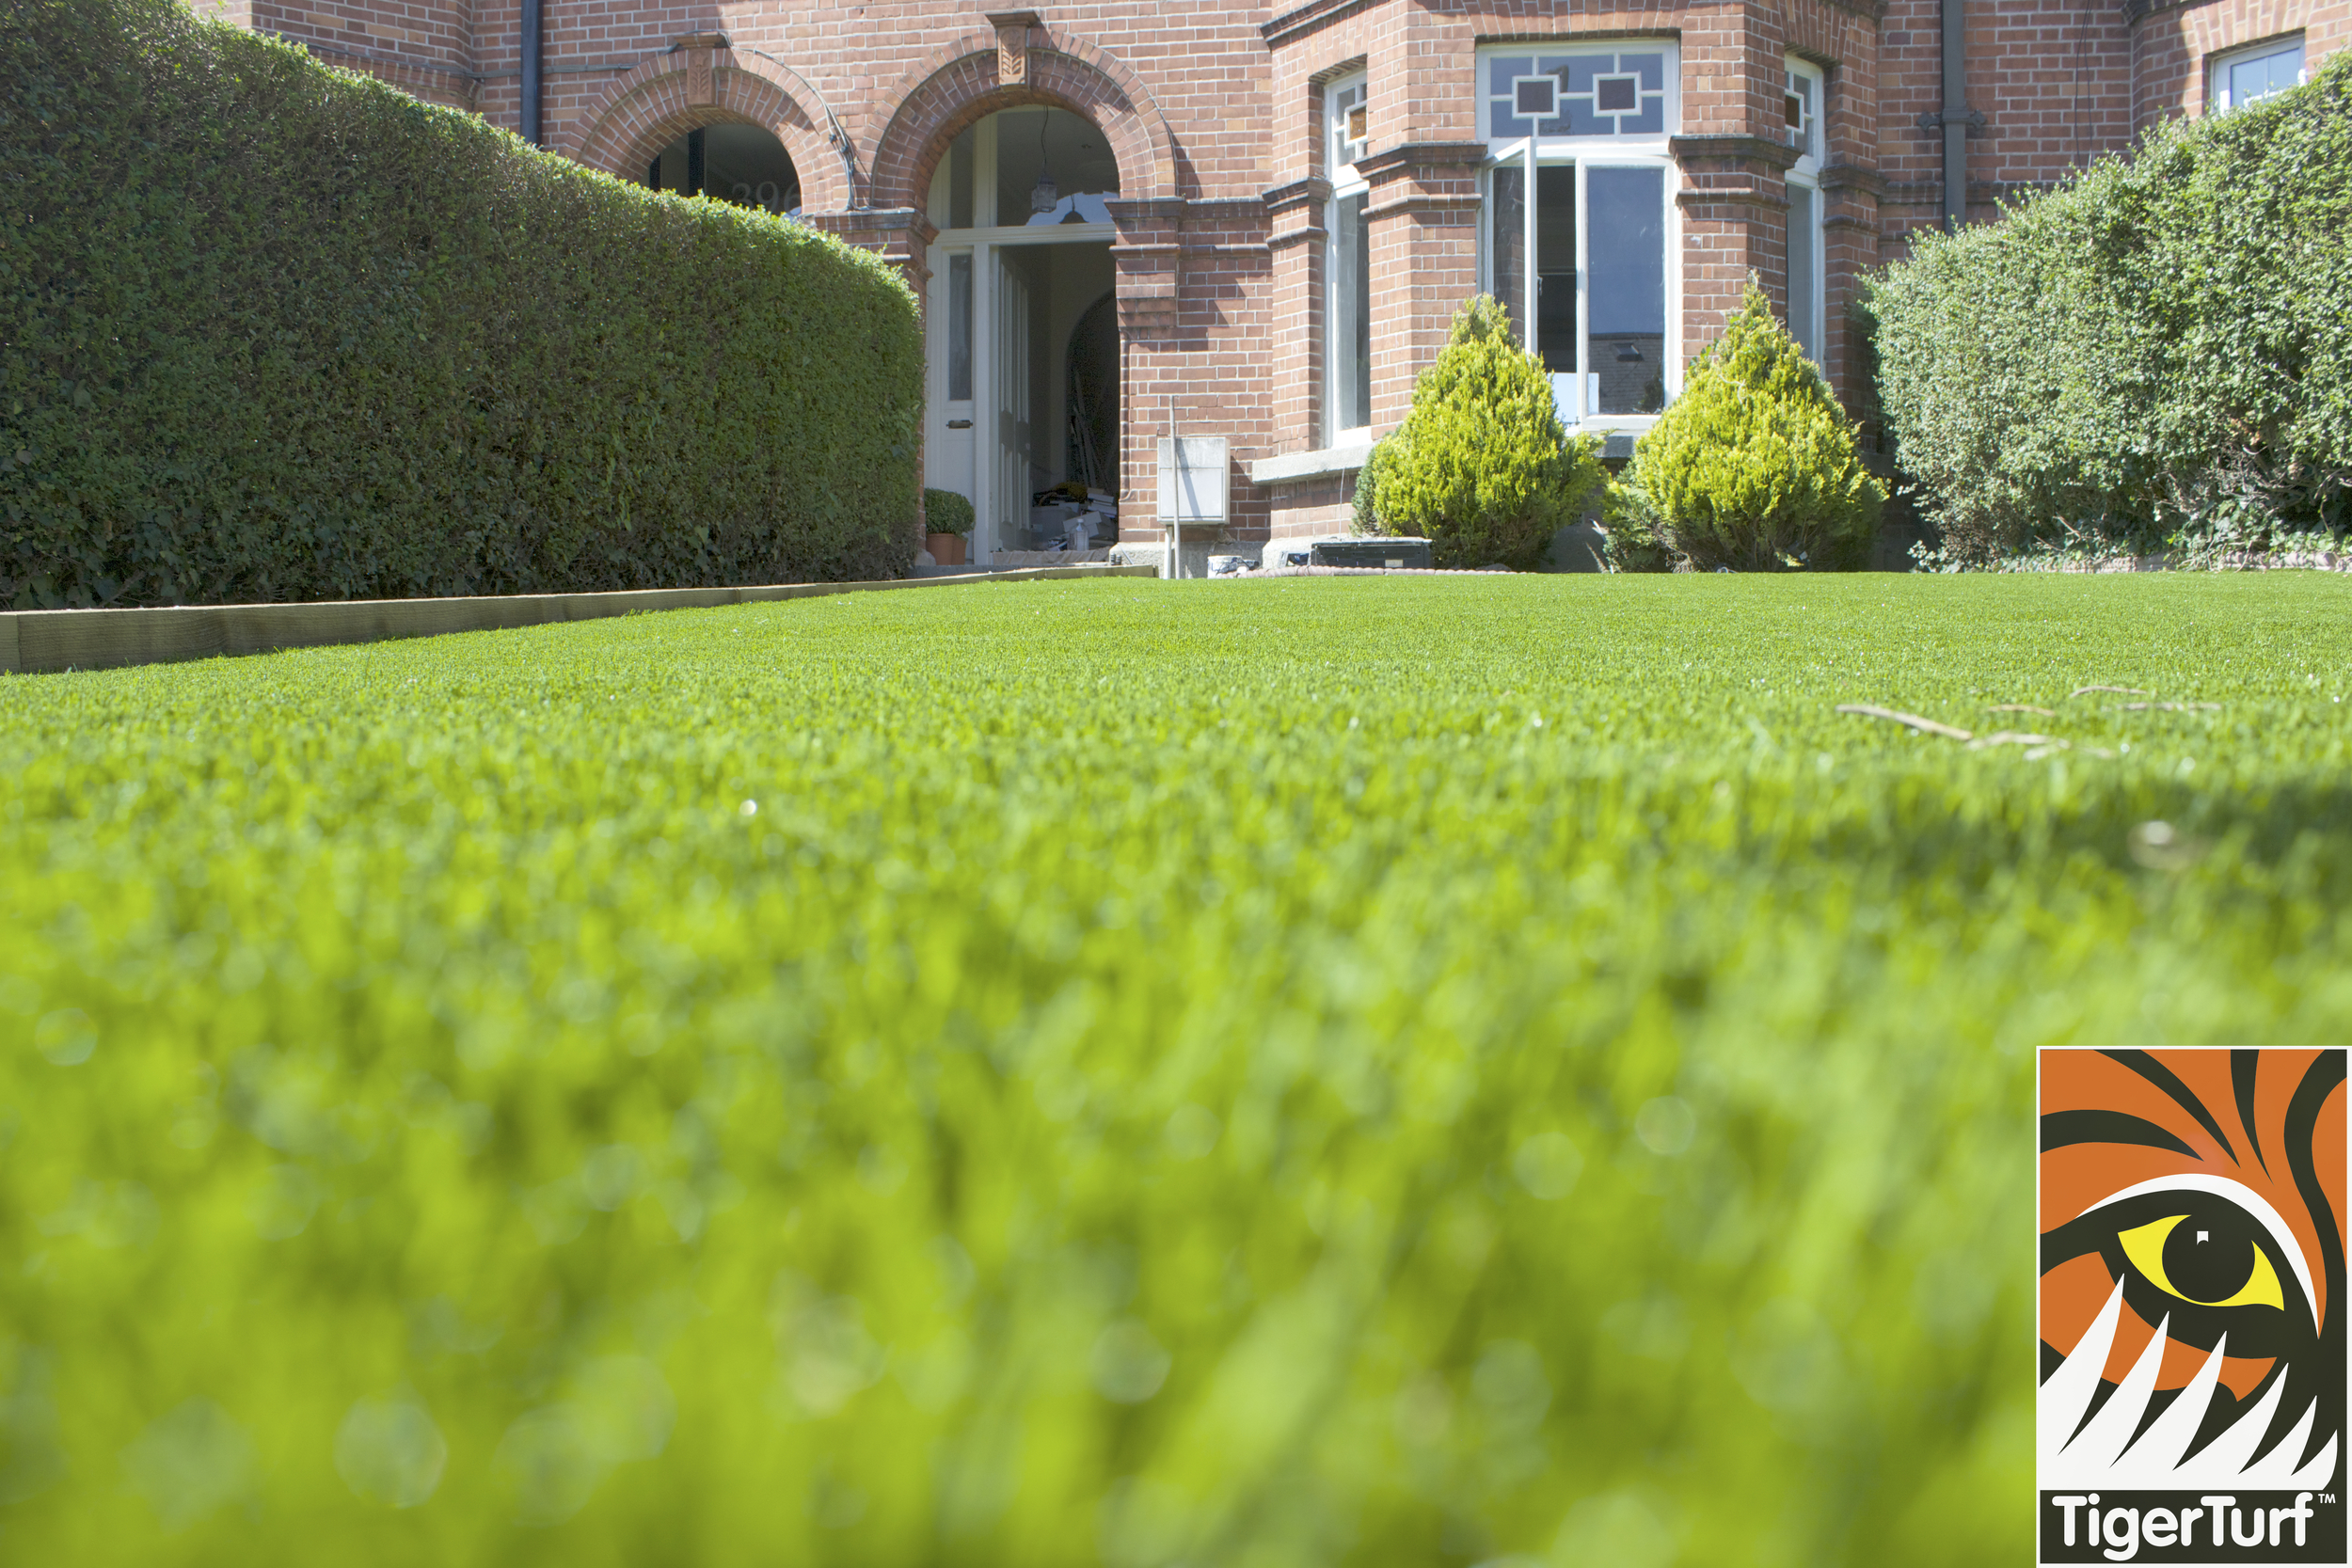 TigerTurf synthetic grass in front garden